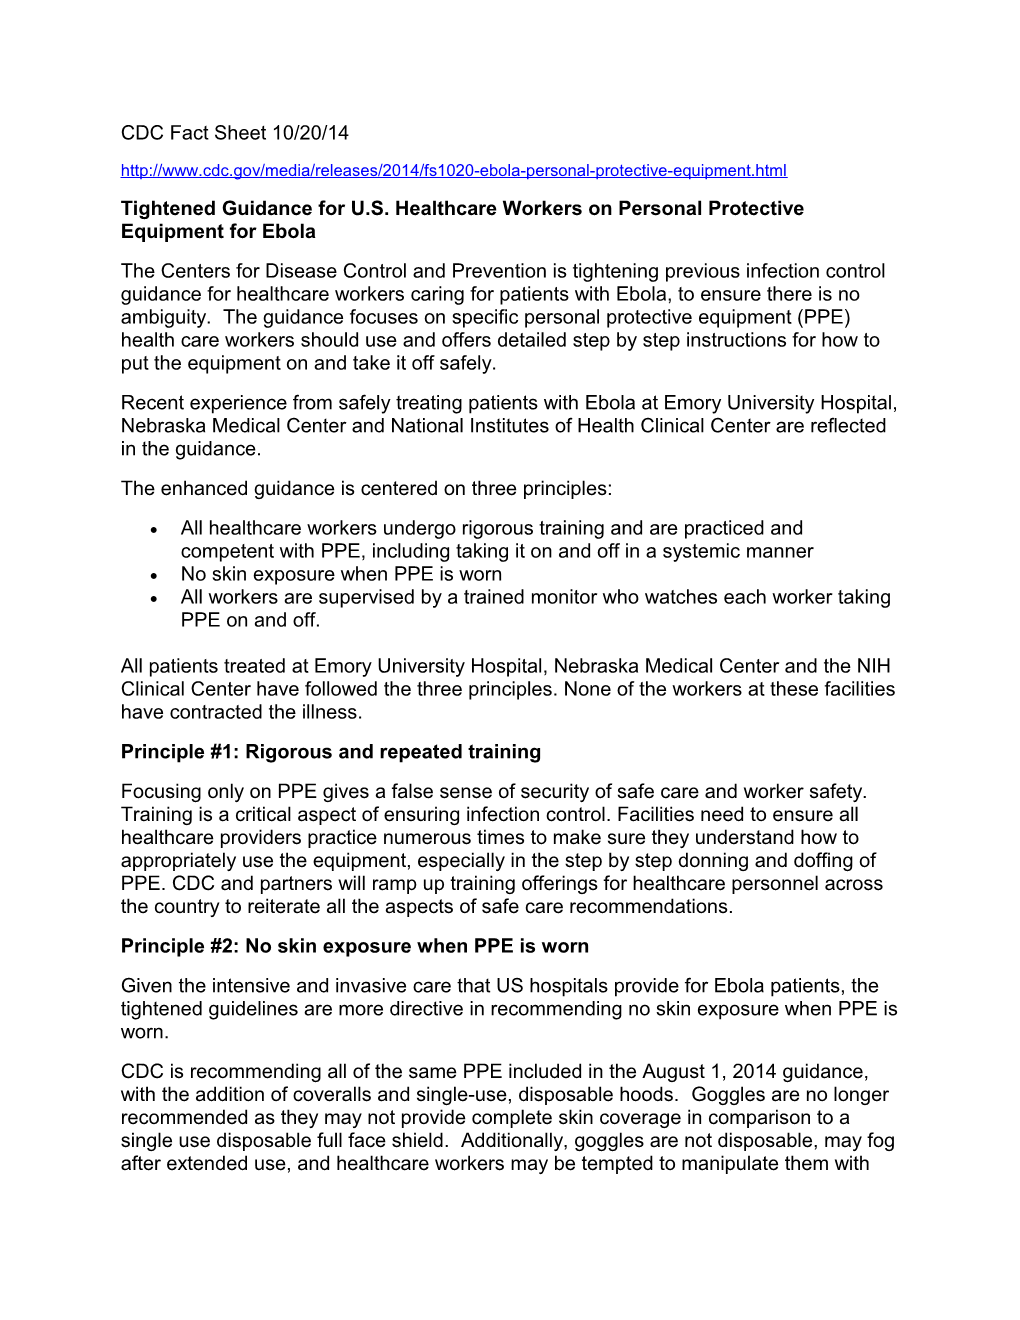 Tightened Guidance for U.S. Healthcare Workers on Personal Protective Equipment for Ebola